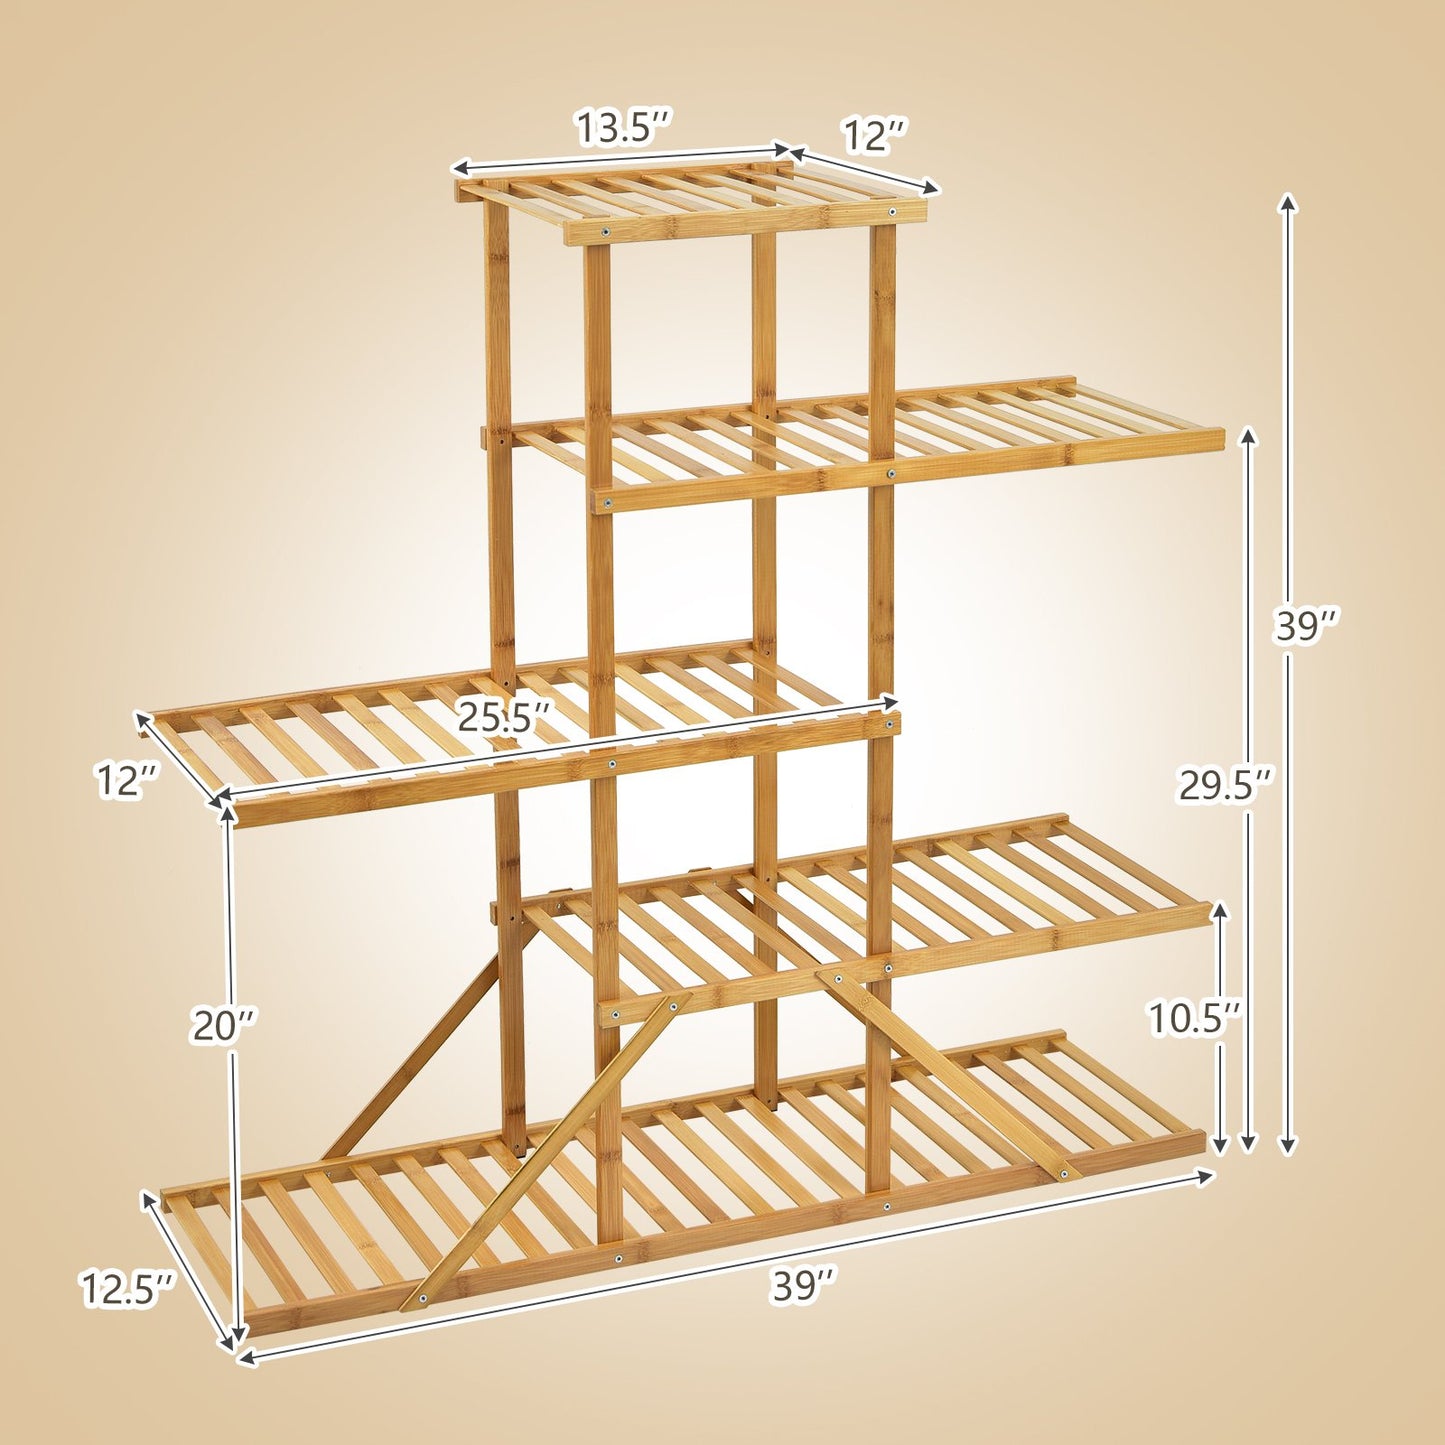 5-tier 10 Potted Bamboo Plant Stand, Natural